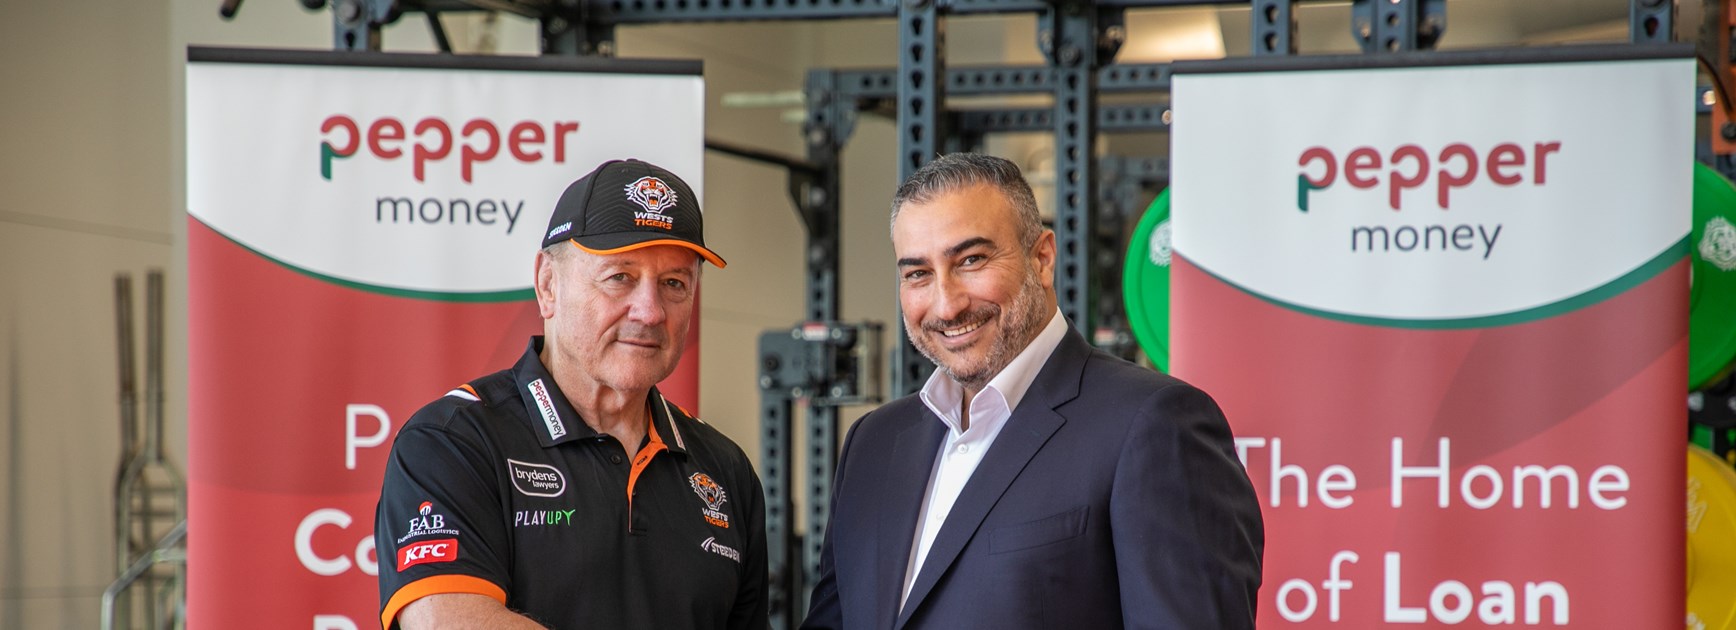 Wests Tigers partner with Pepper Money